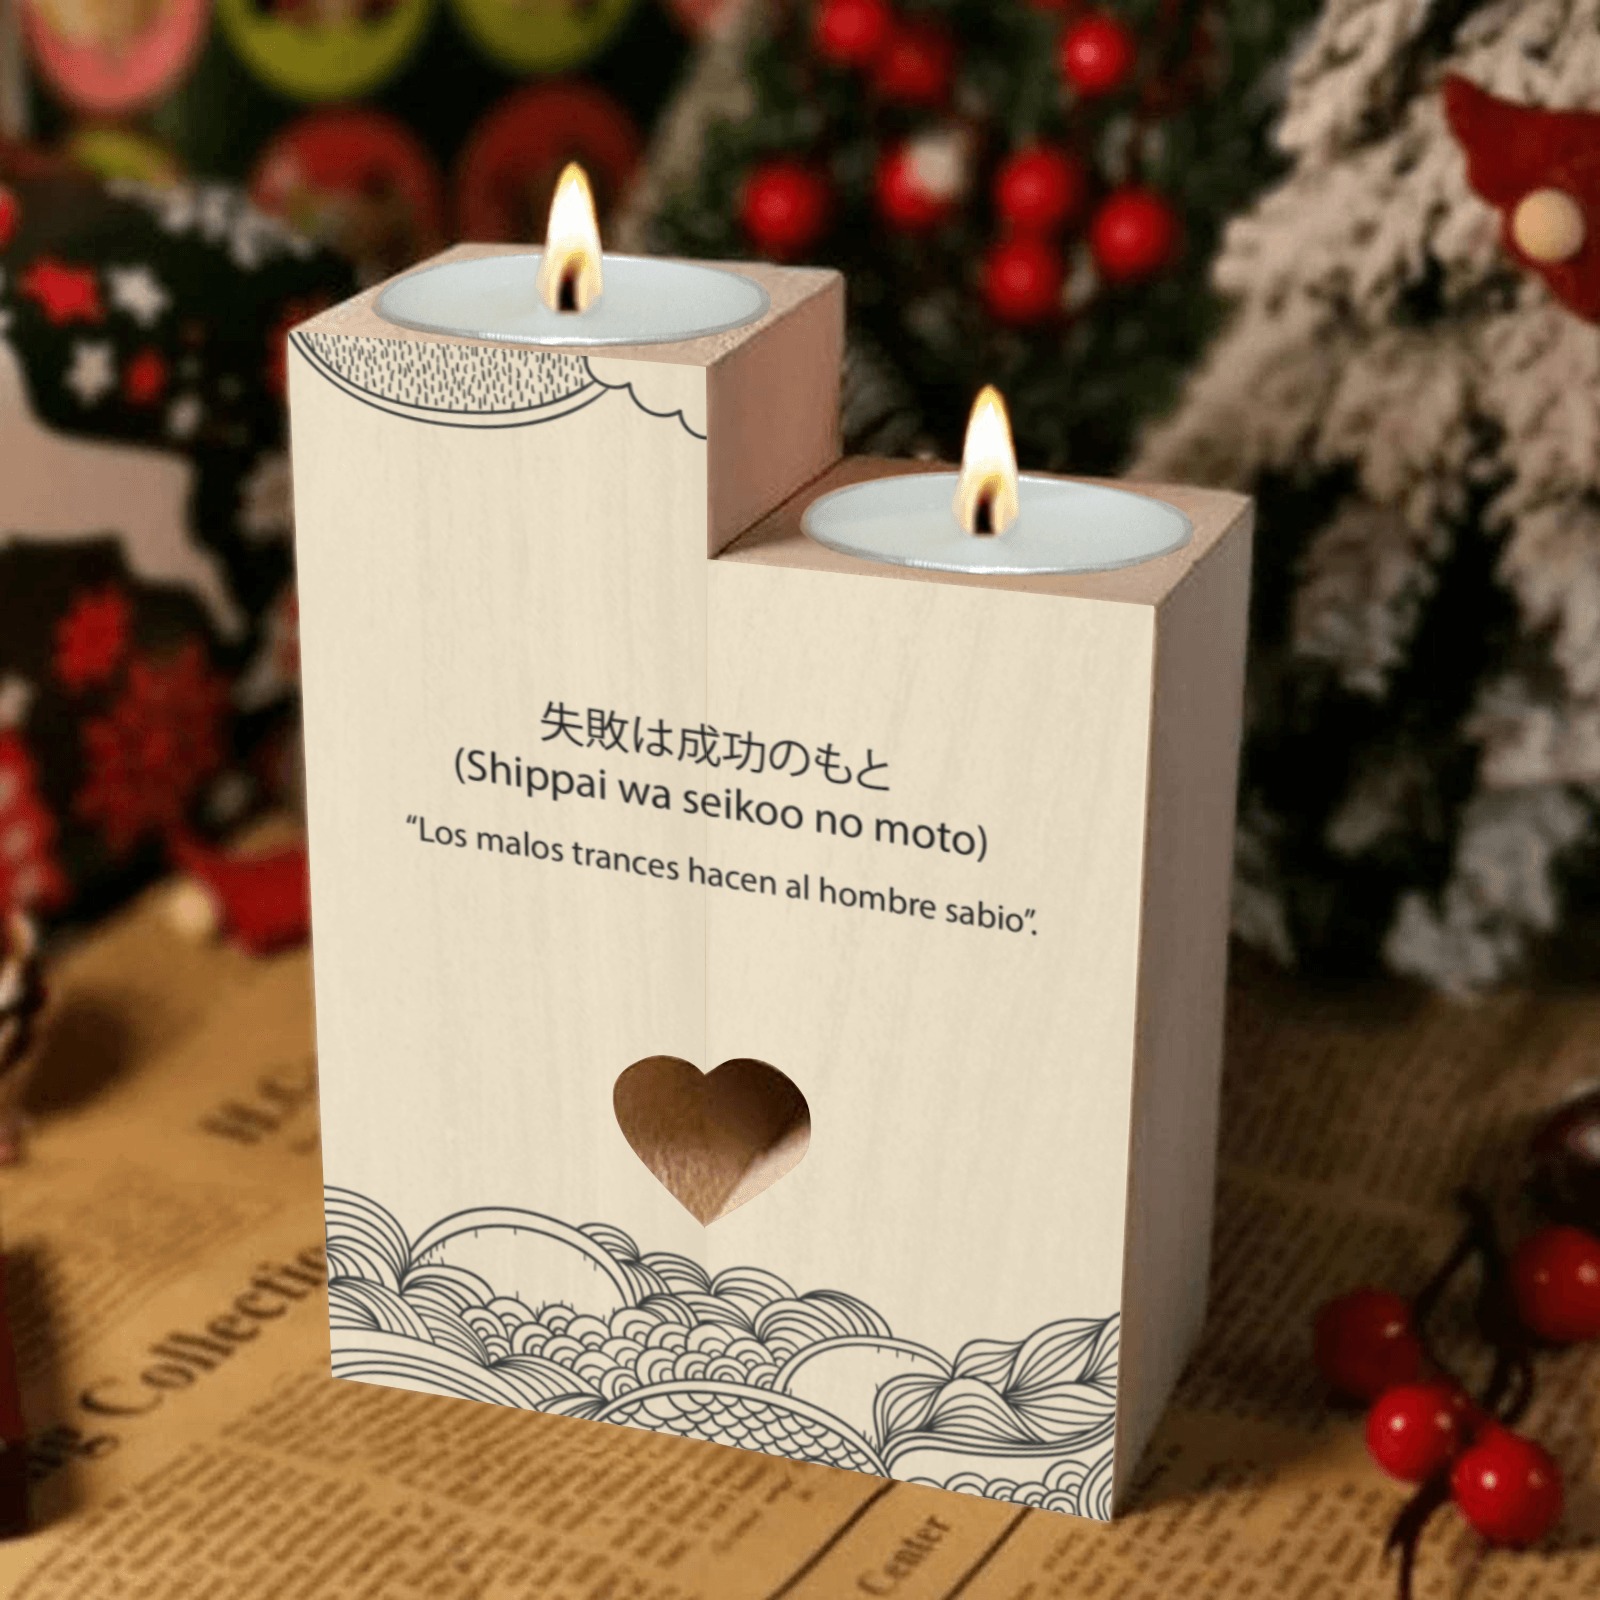 DOBLE VELA CORAZON FRASES PARA TI - M1 Wooden Candle Holder (Without Candle)